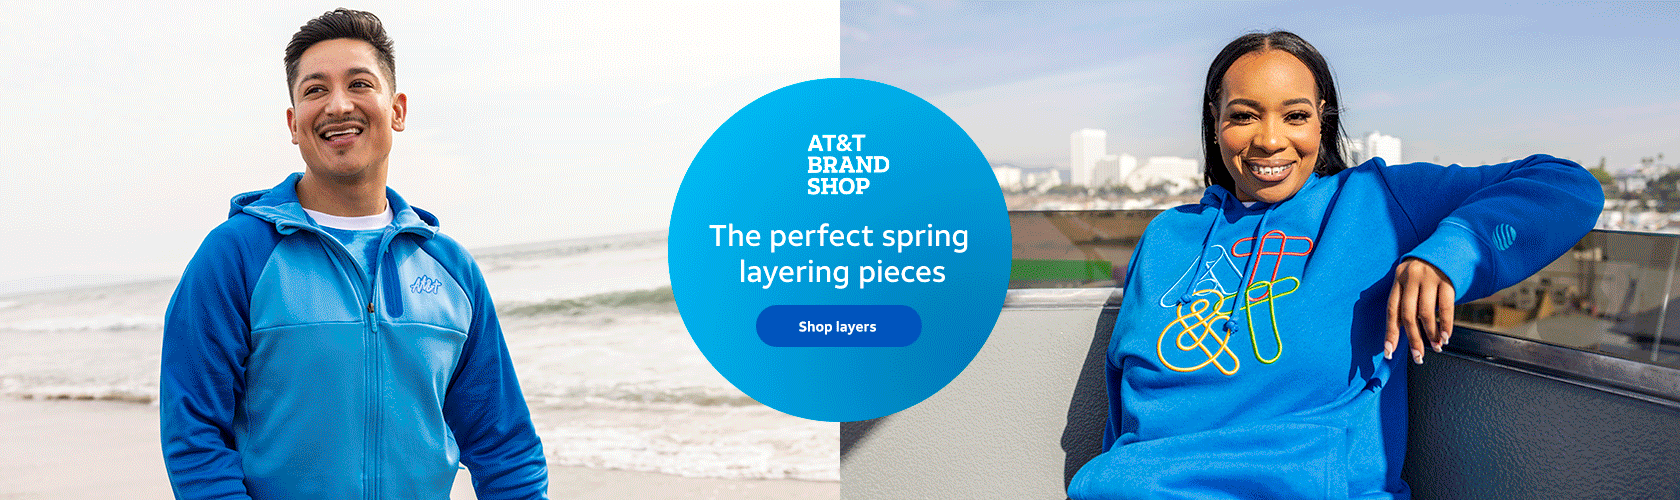 AT&T Brand Shop - The perfect spring layering peices - Shop layers